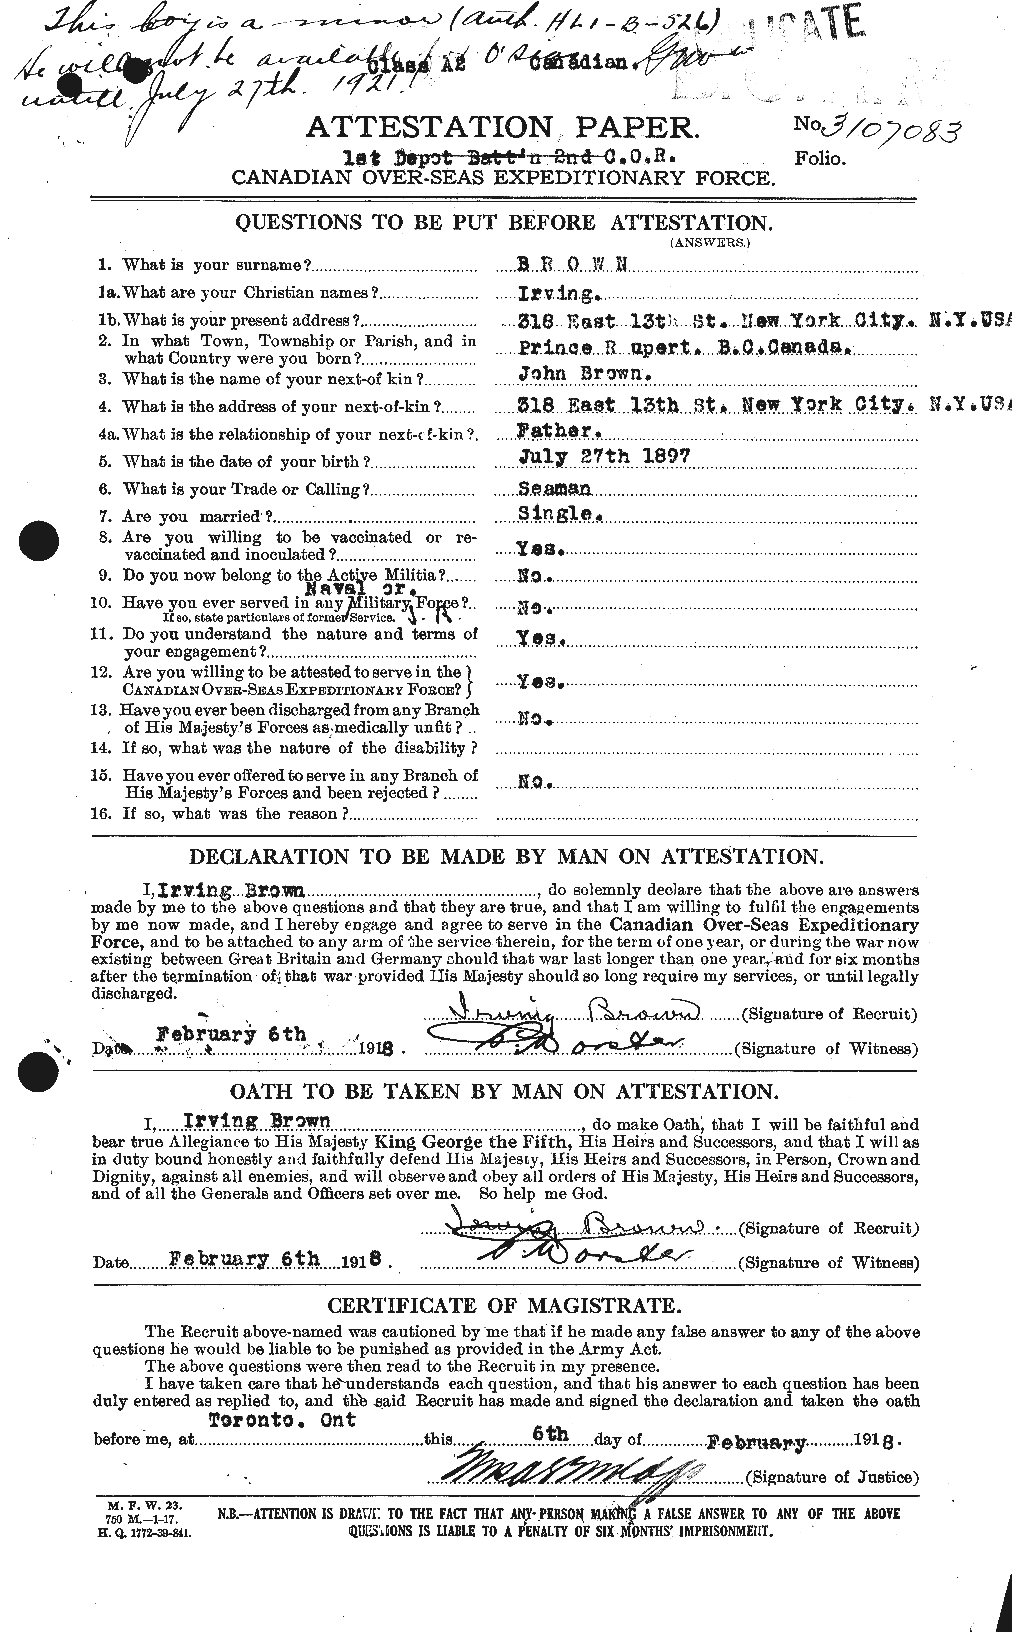 Personnel Records of the First World War - CEF 265660a